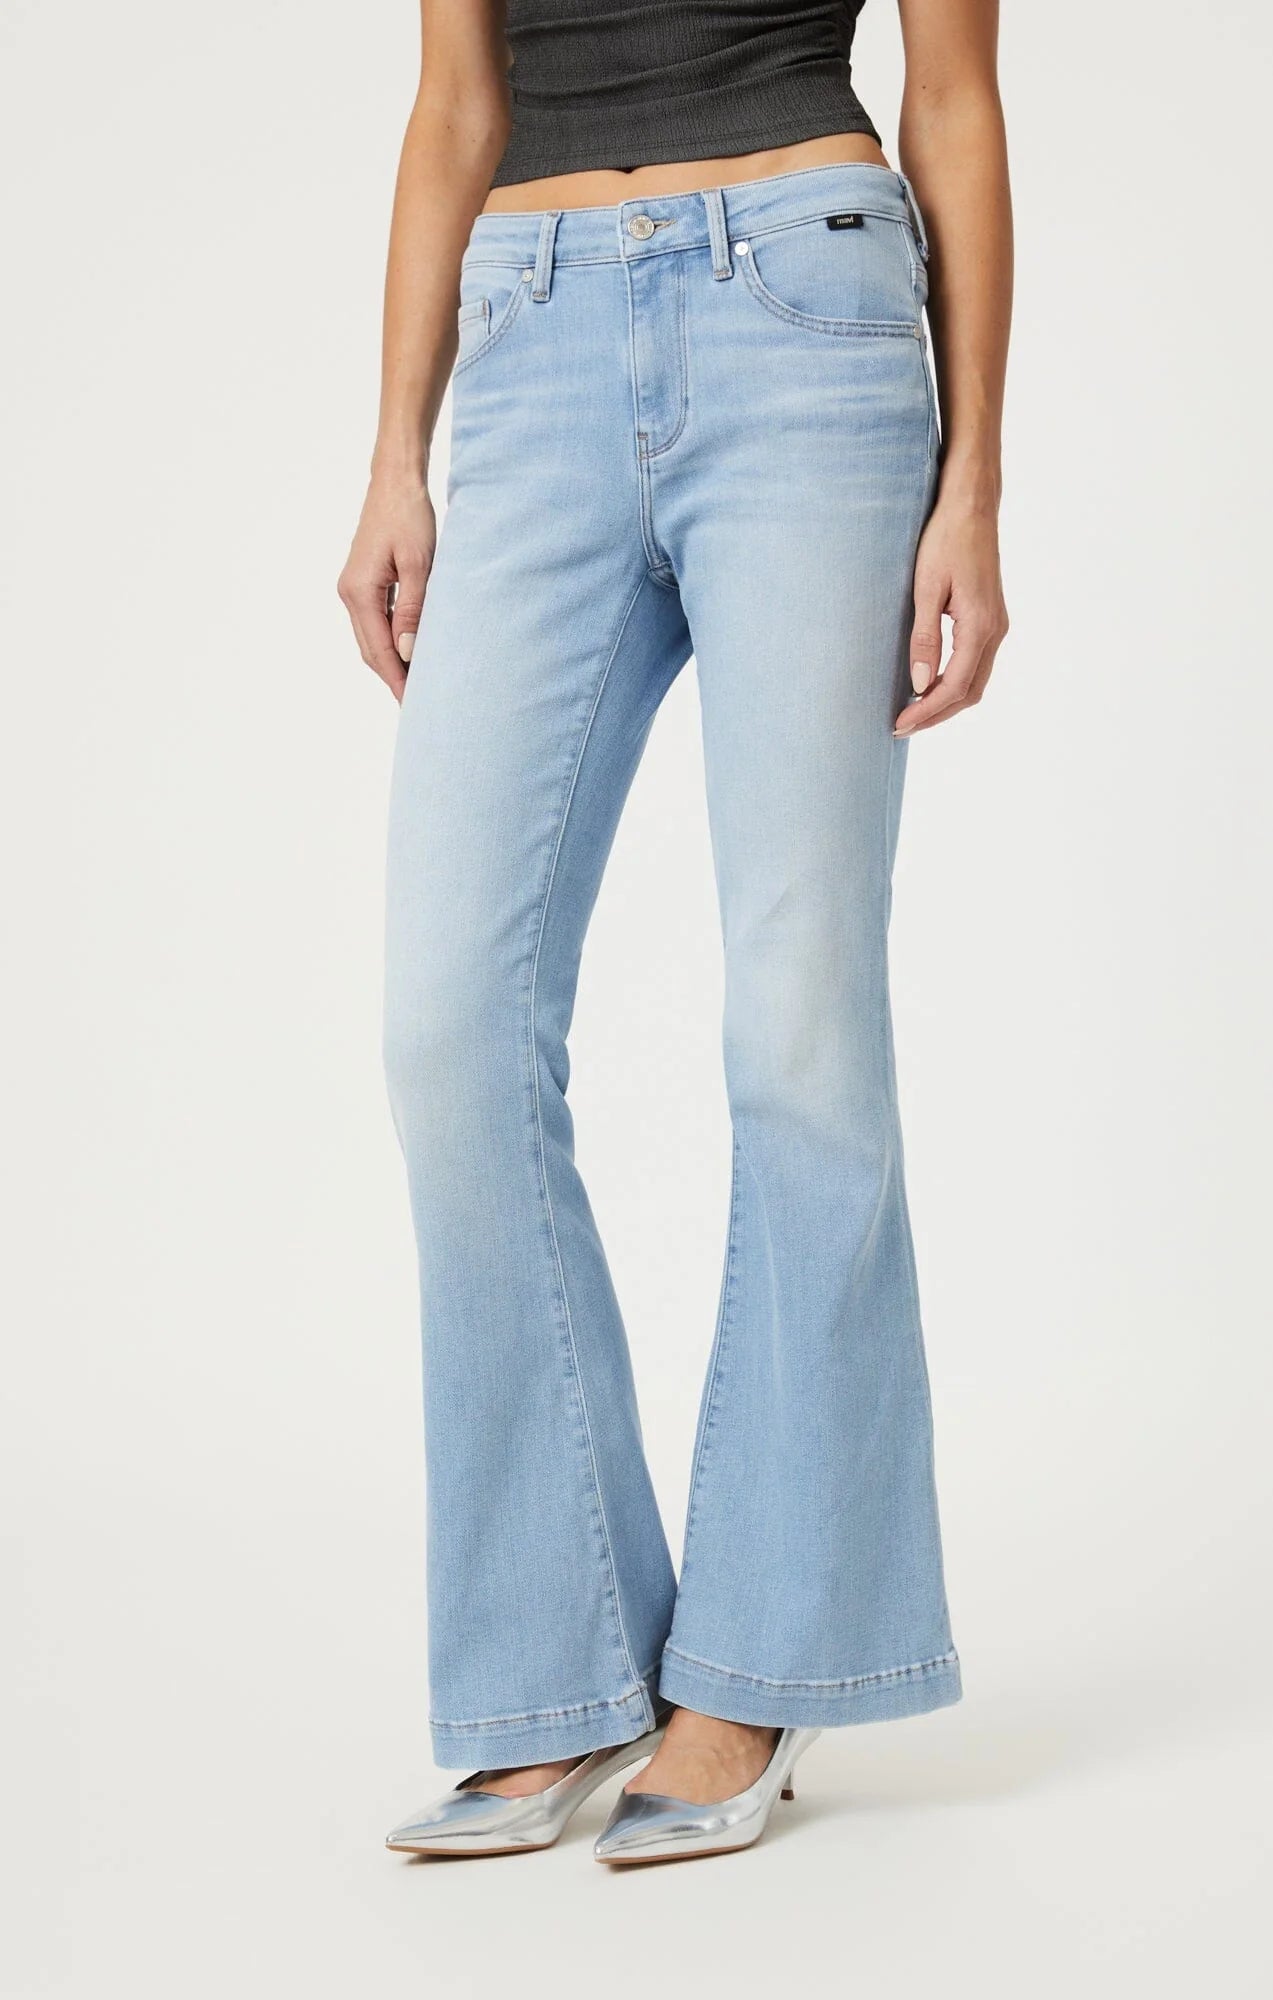 Sydney Flare Jeans